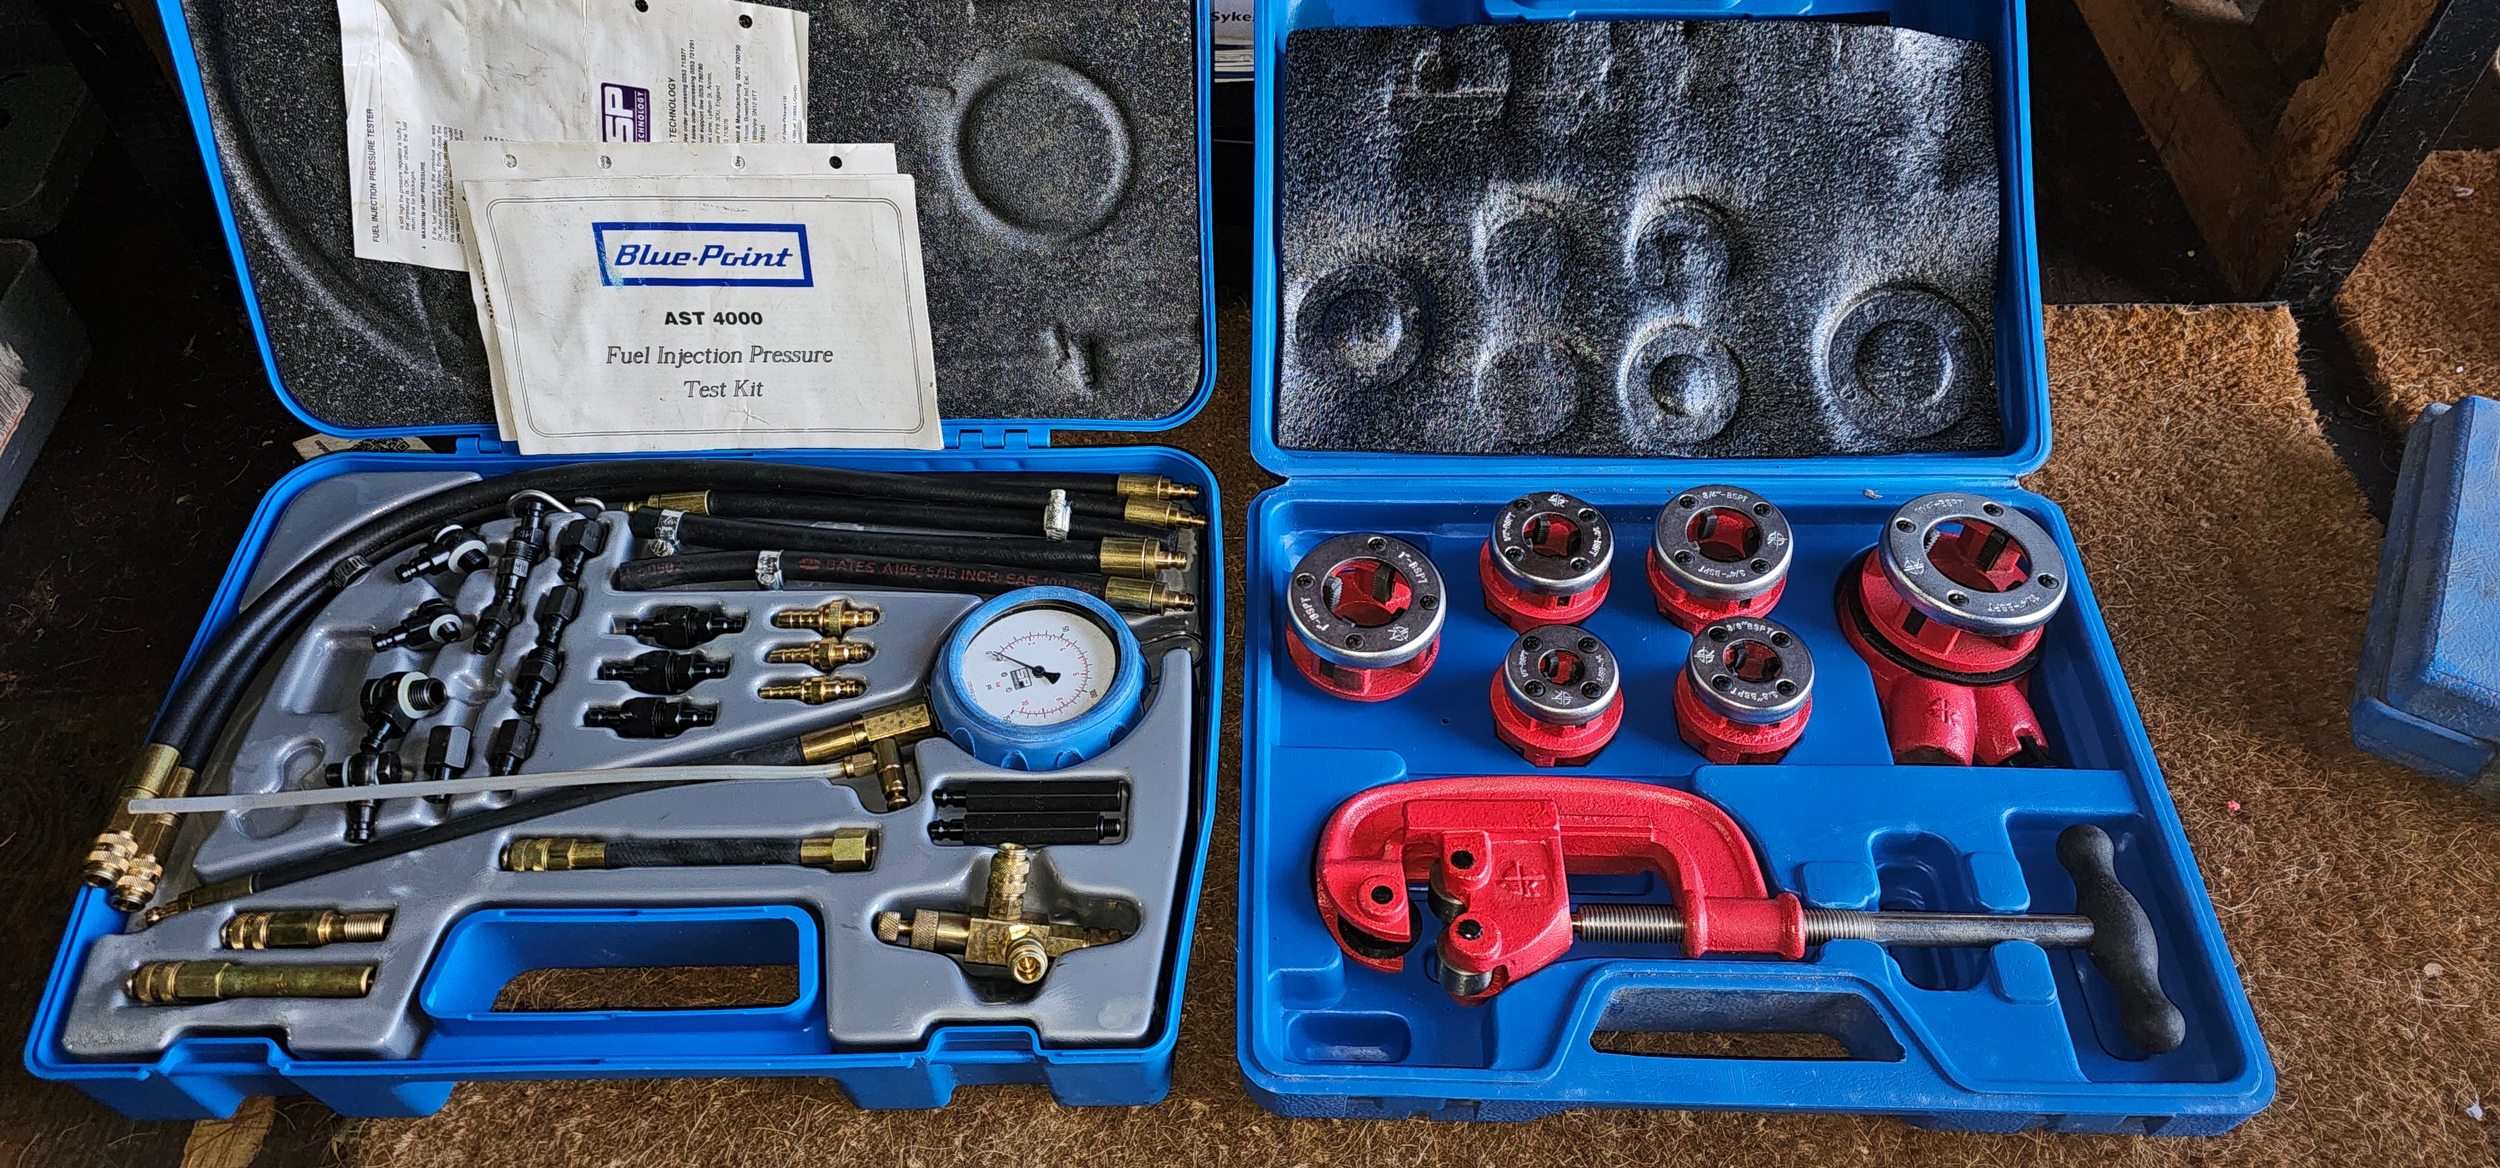 A Blue Point AST 4000 pressure test kit, an ACR Systems tester and other tools - Image 2 of 2